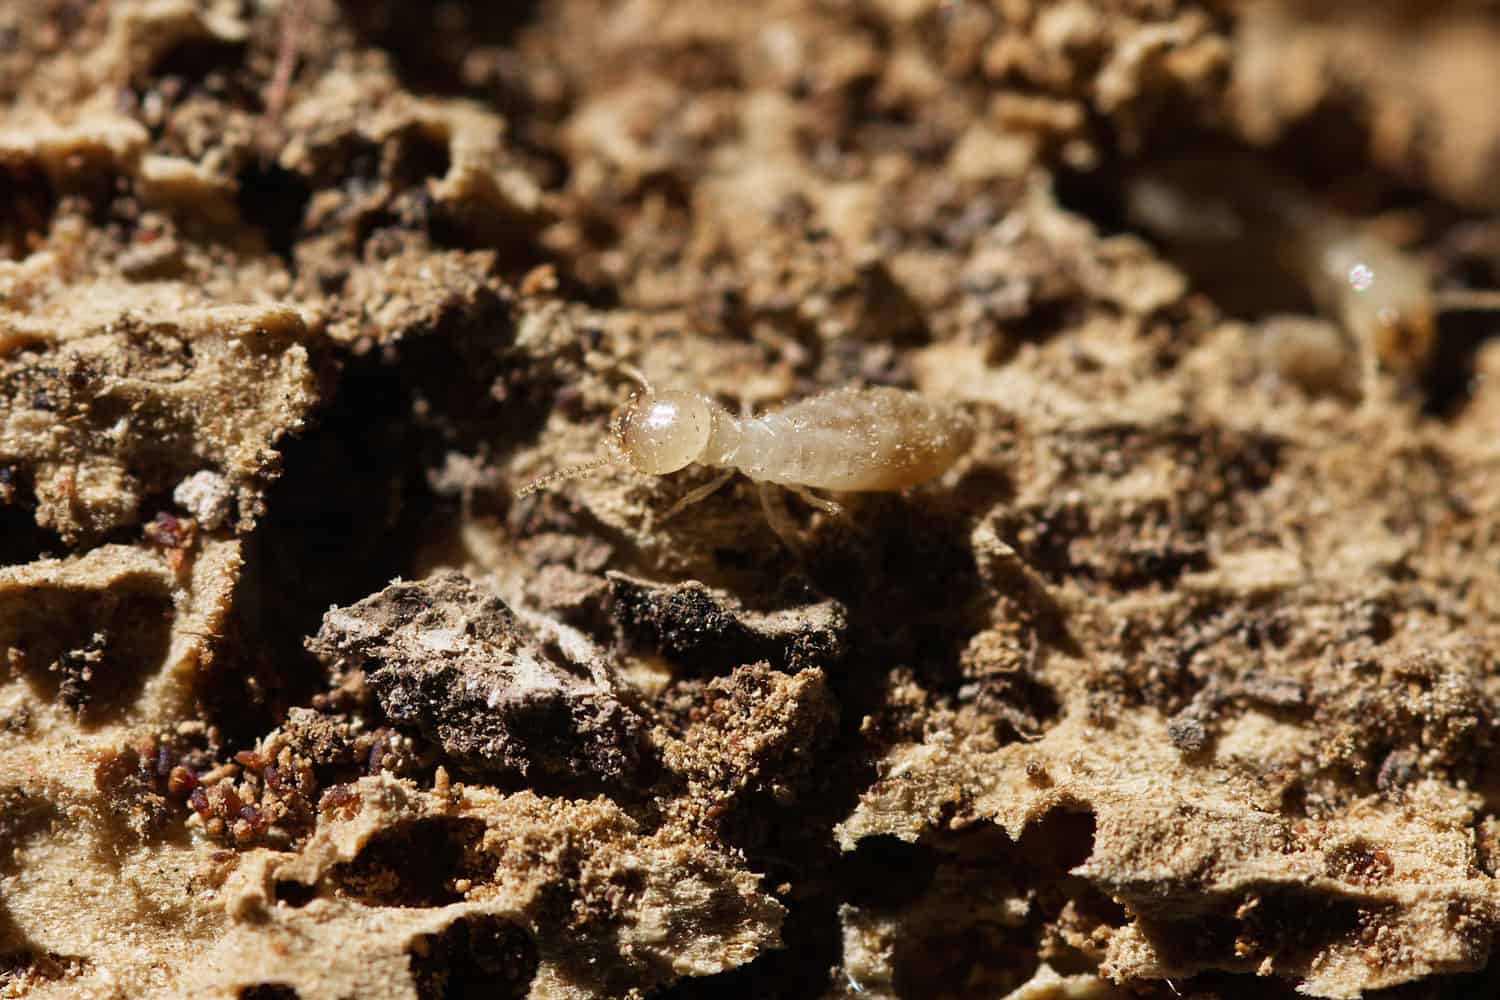 A dry wood termite walking on the dirt